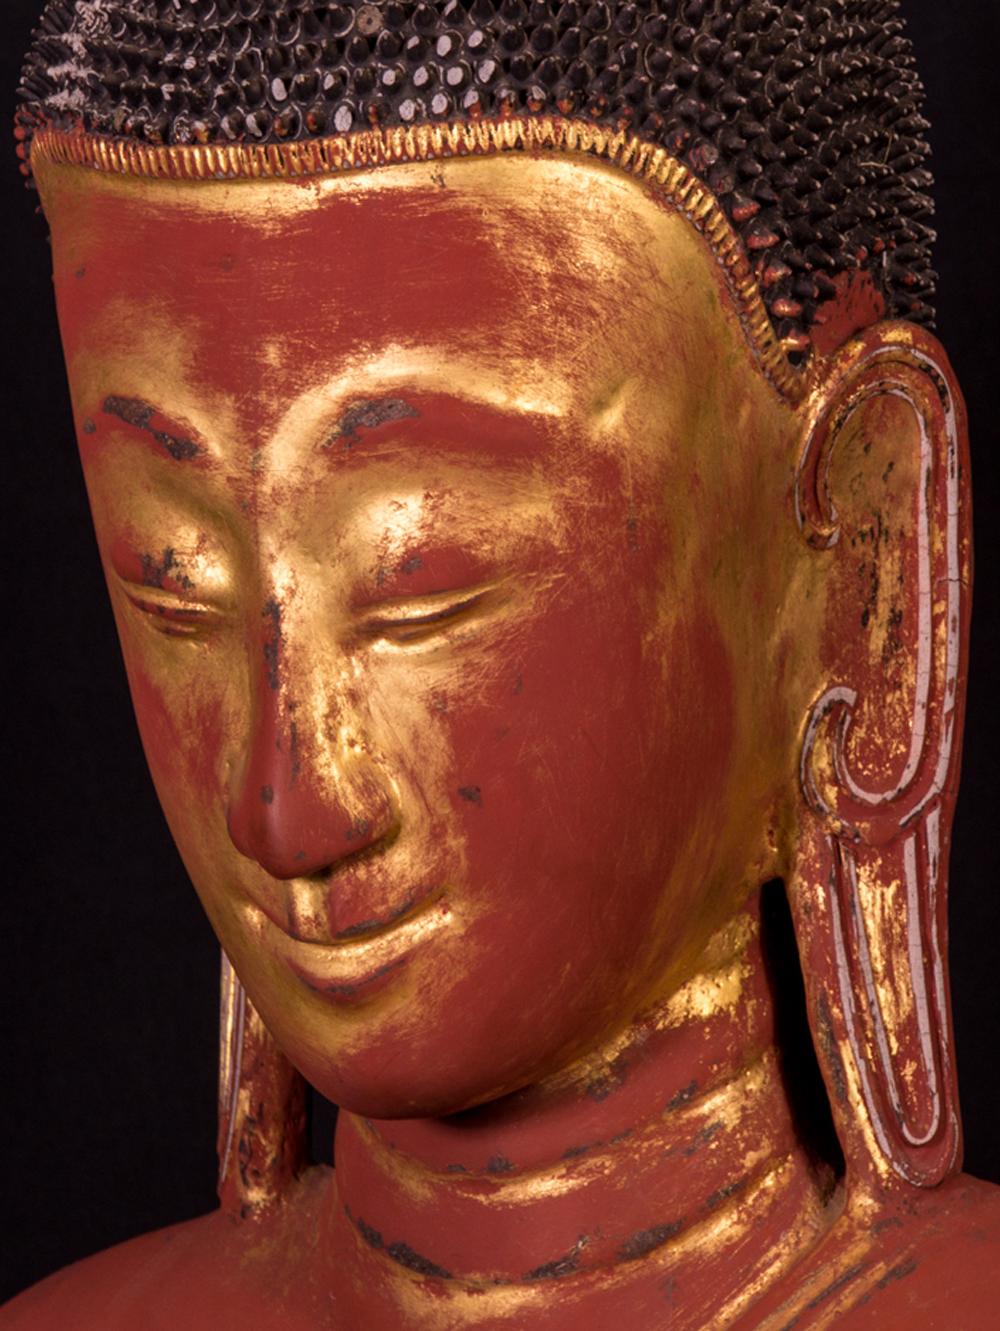 Lacquer Large Antique Ava Buddha Statue from Burma For Sale